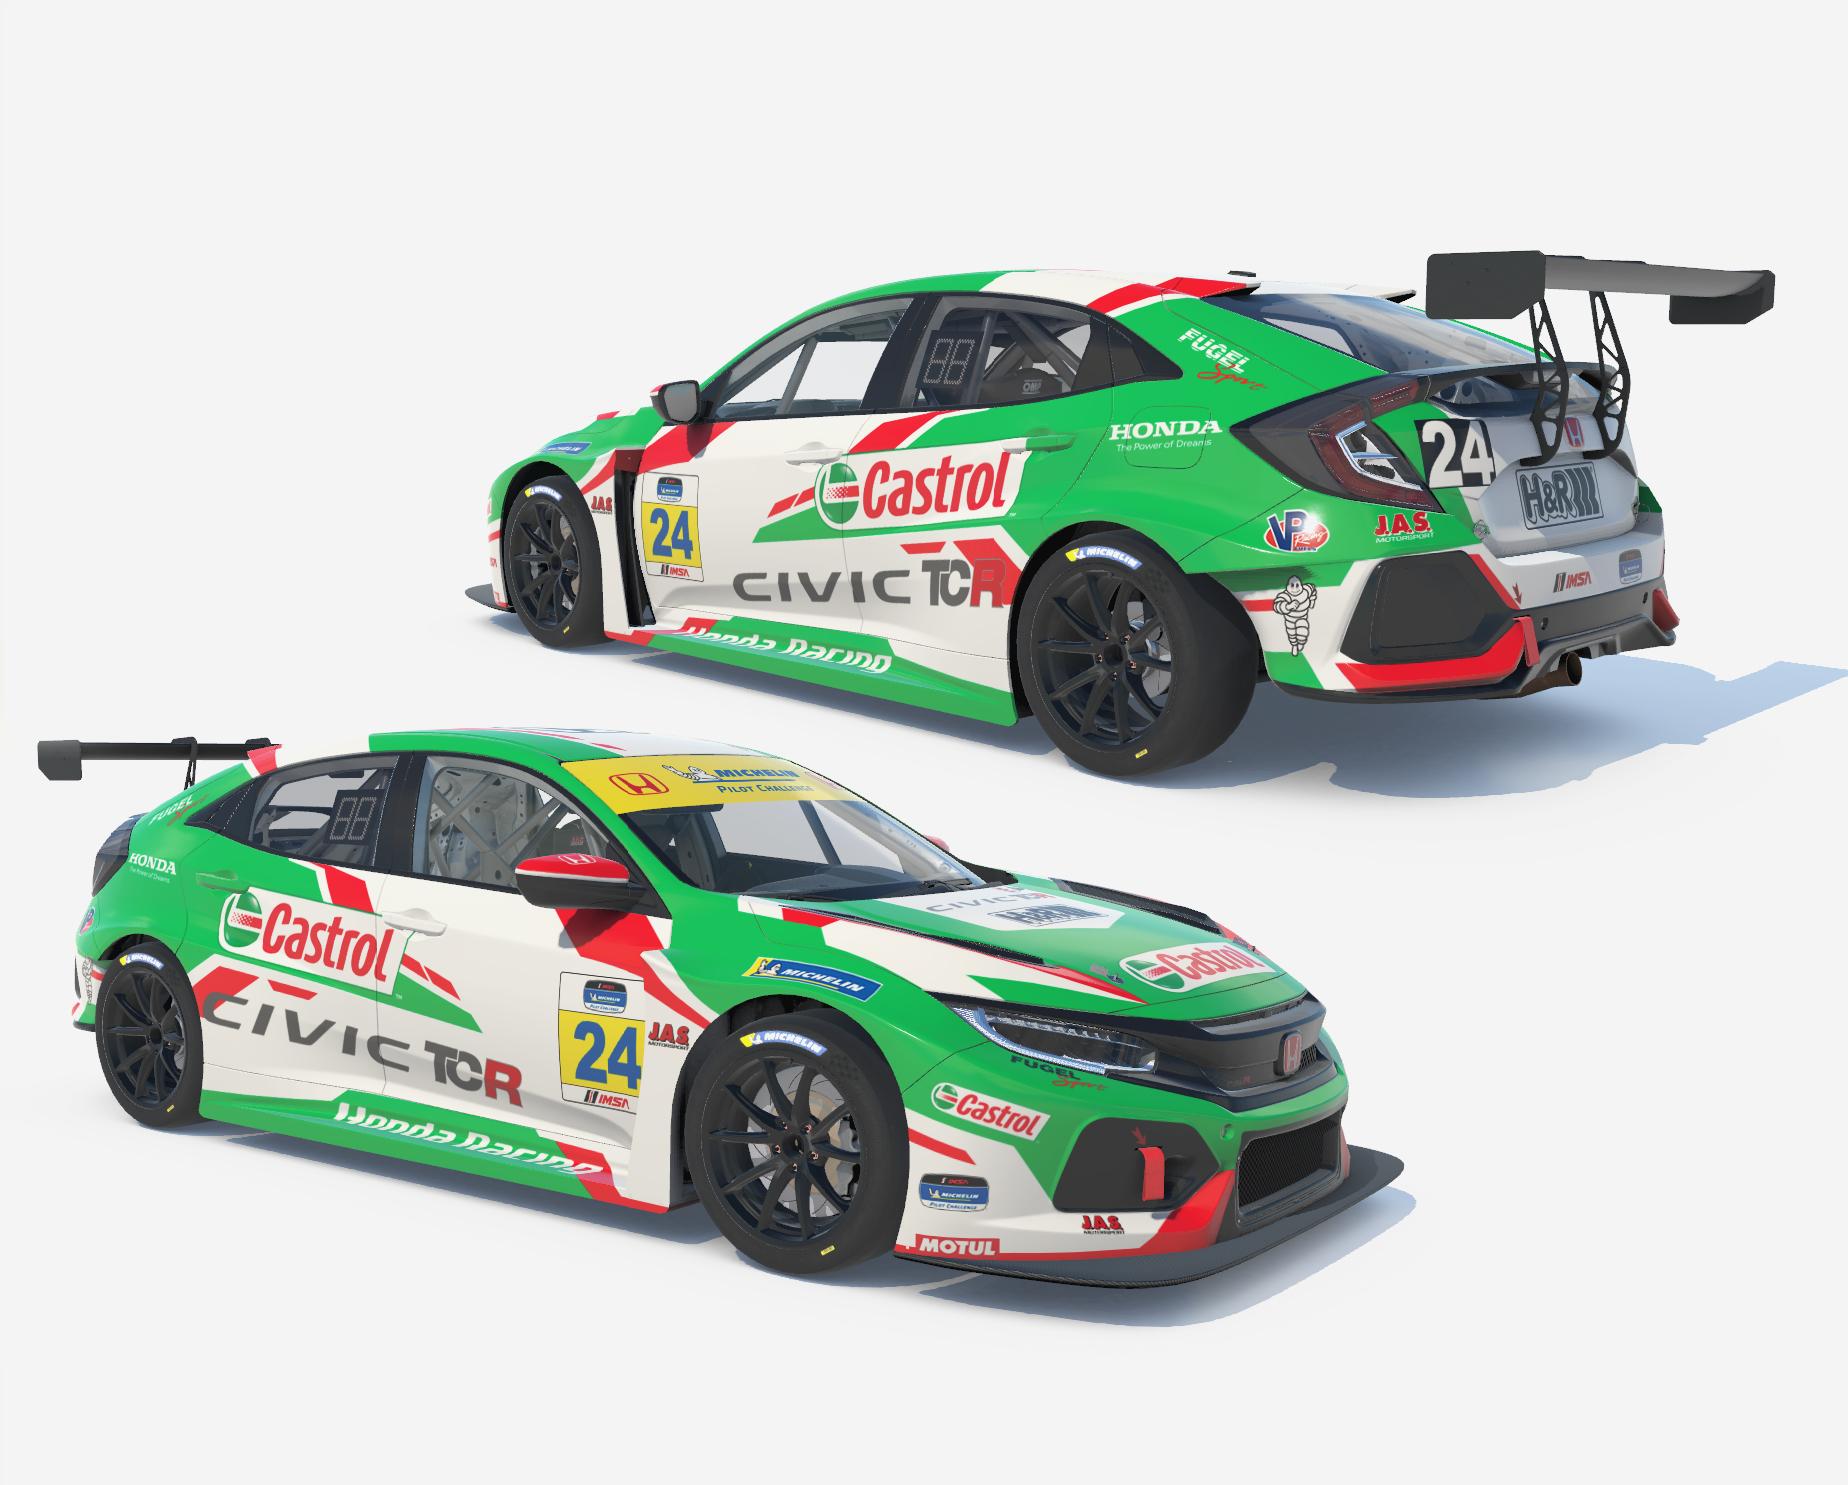 Preview of Castrol Civic TCR by Sean Disbro2